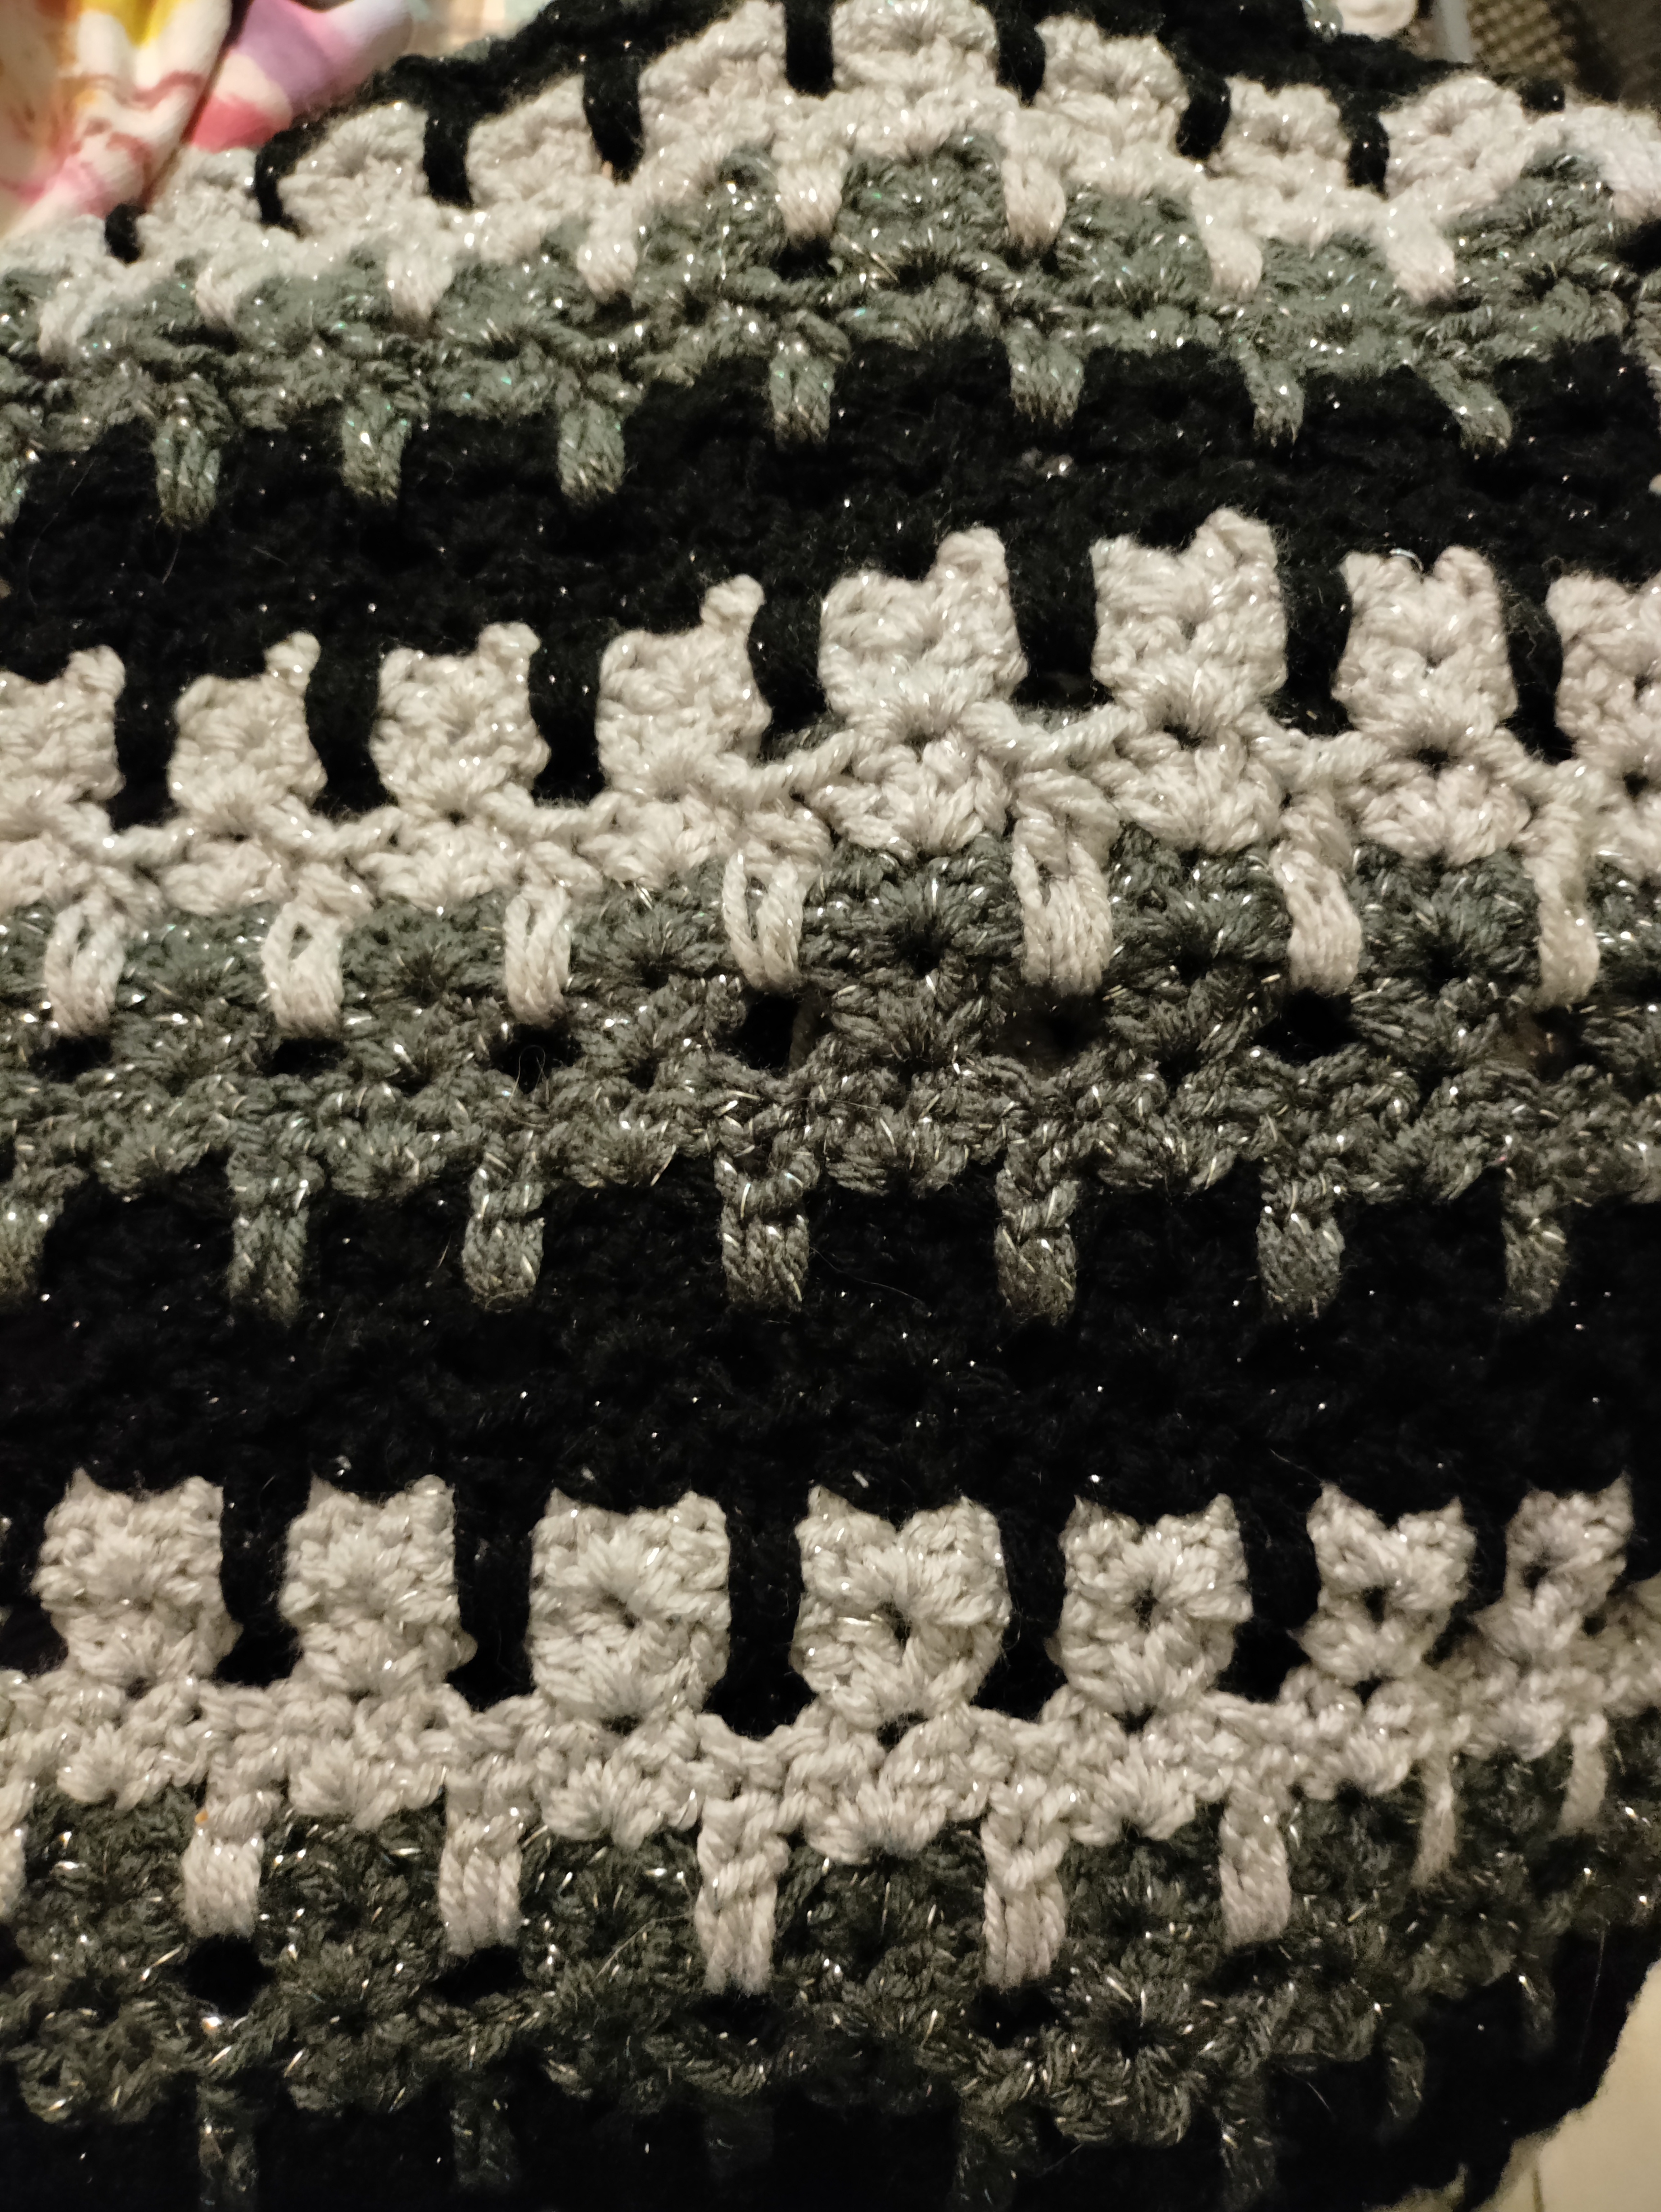 close up of crocheted rows of a cat shaped stitch in alternating rows of glittery silver, dark gray, and black yarns